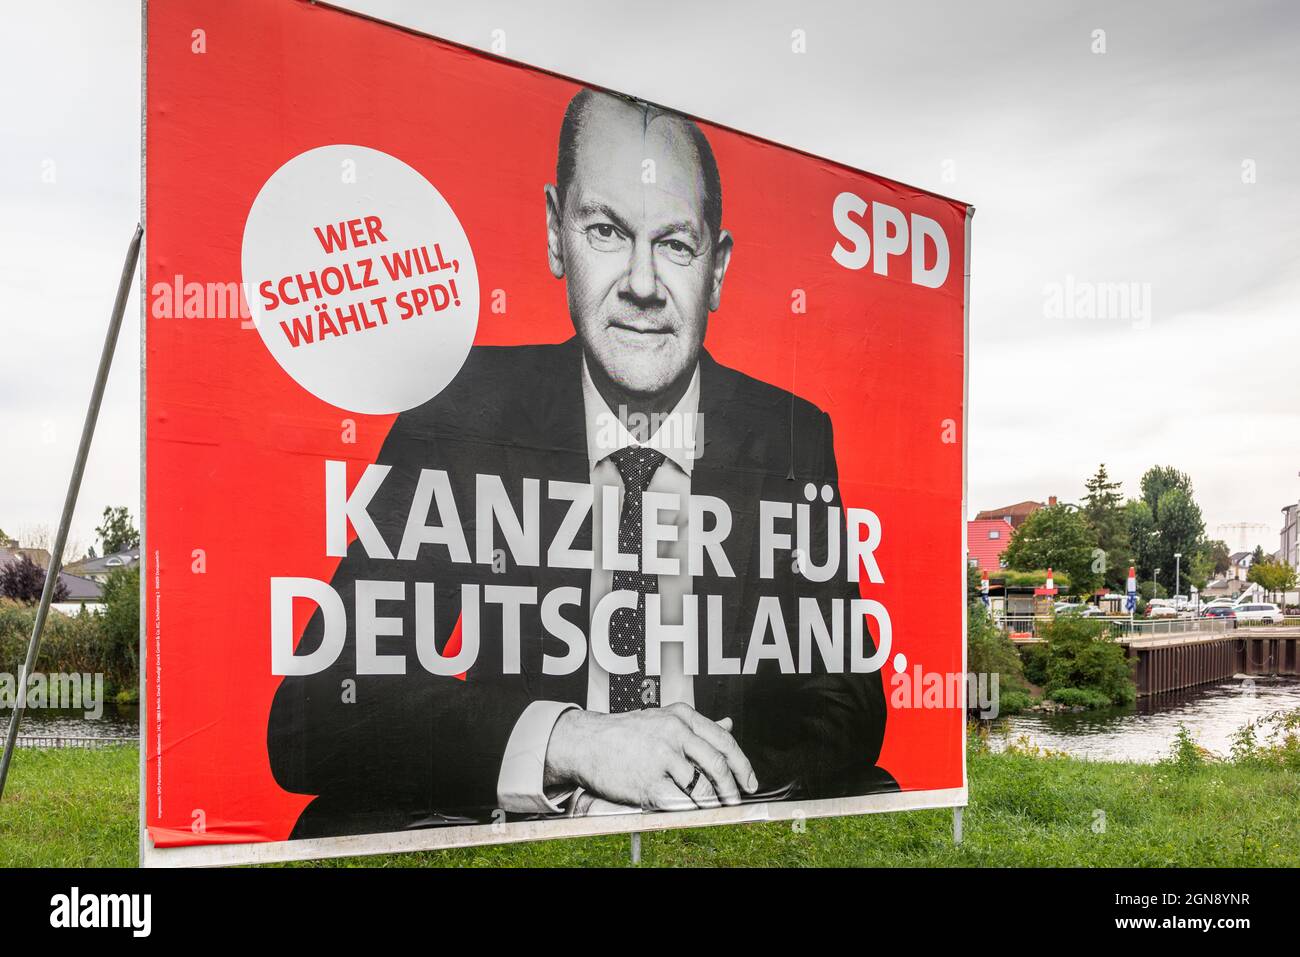 2021 Bundestag / German Federal Election campaign billboard reading 'Kanzler fuer Deutschland' for the centre left Social Democratic Party of Germany picturing candidate Olaf Scholz currently the leading contestant likely to become the new chancellor of Germany September 2021, Berlin, Germany, EU Stock Photo